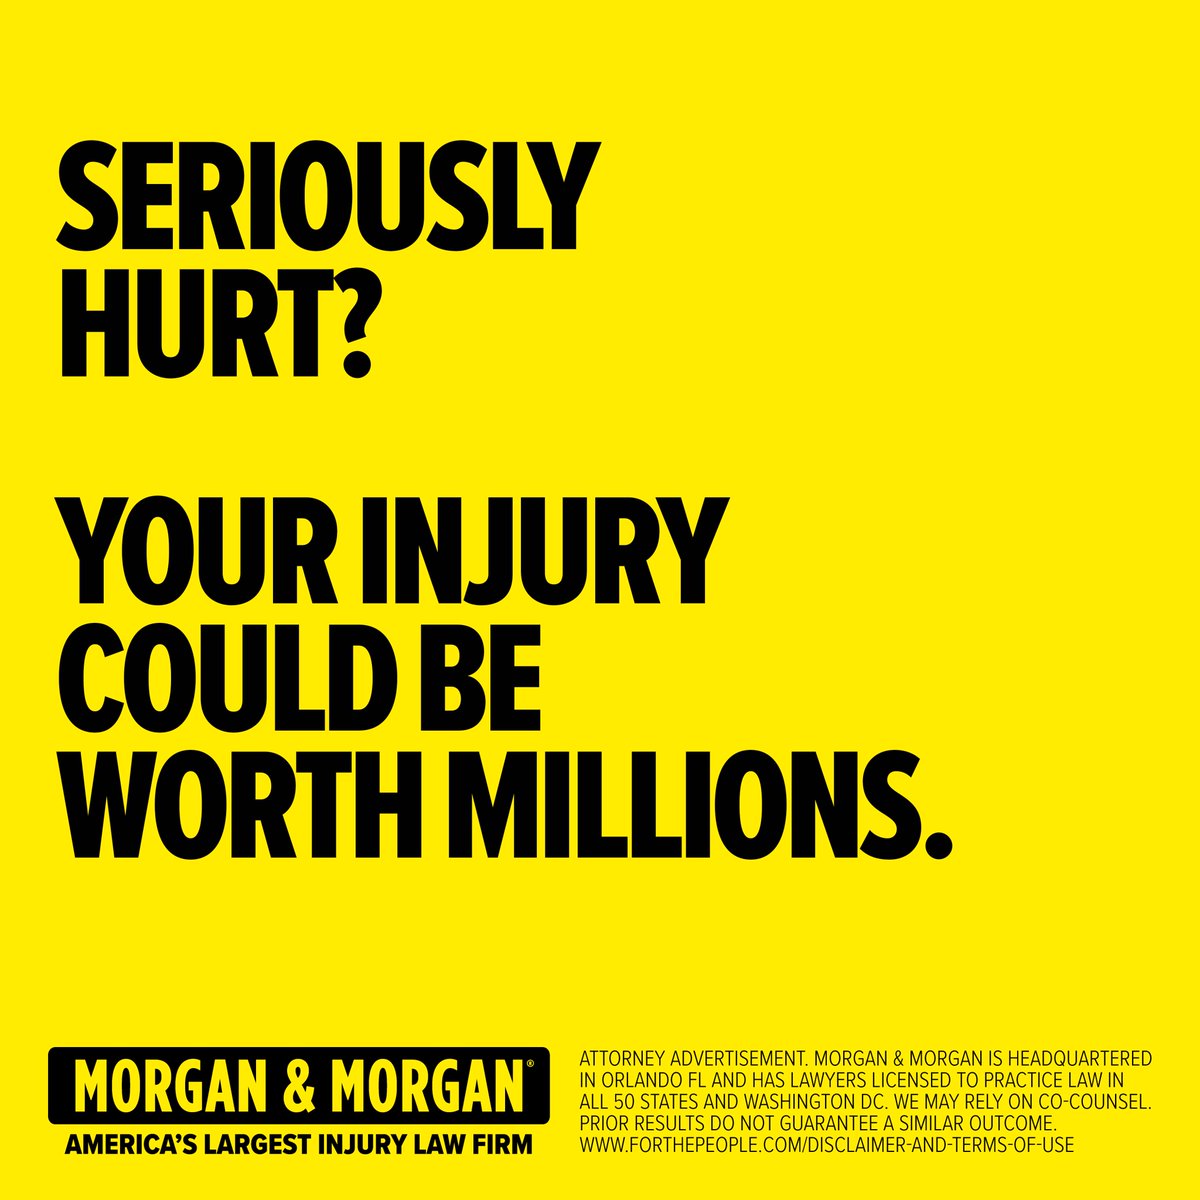 Morgan & Morgan recently won a car crash client $25 million. When you're seriously hurt, your injury could be worth millions. You can start your claim now in just a click #ad forthepeople.com/HORSING